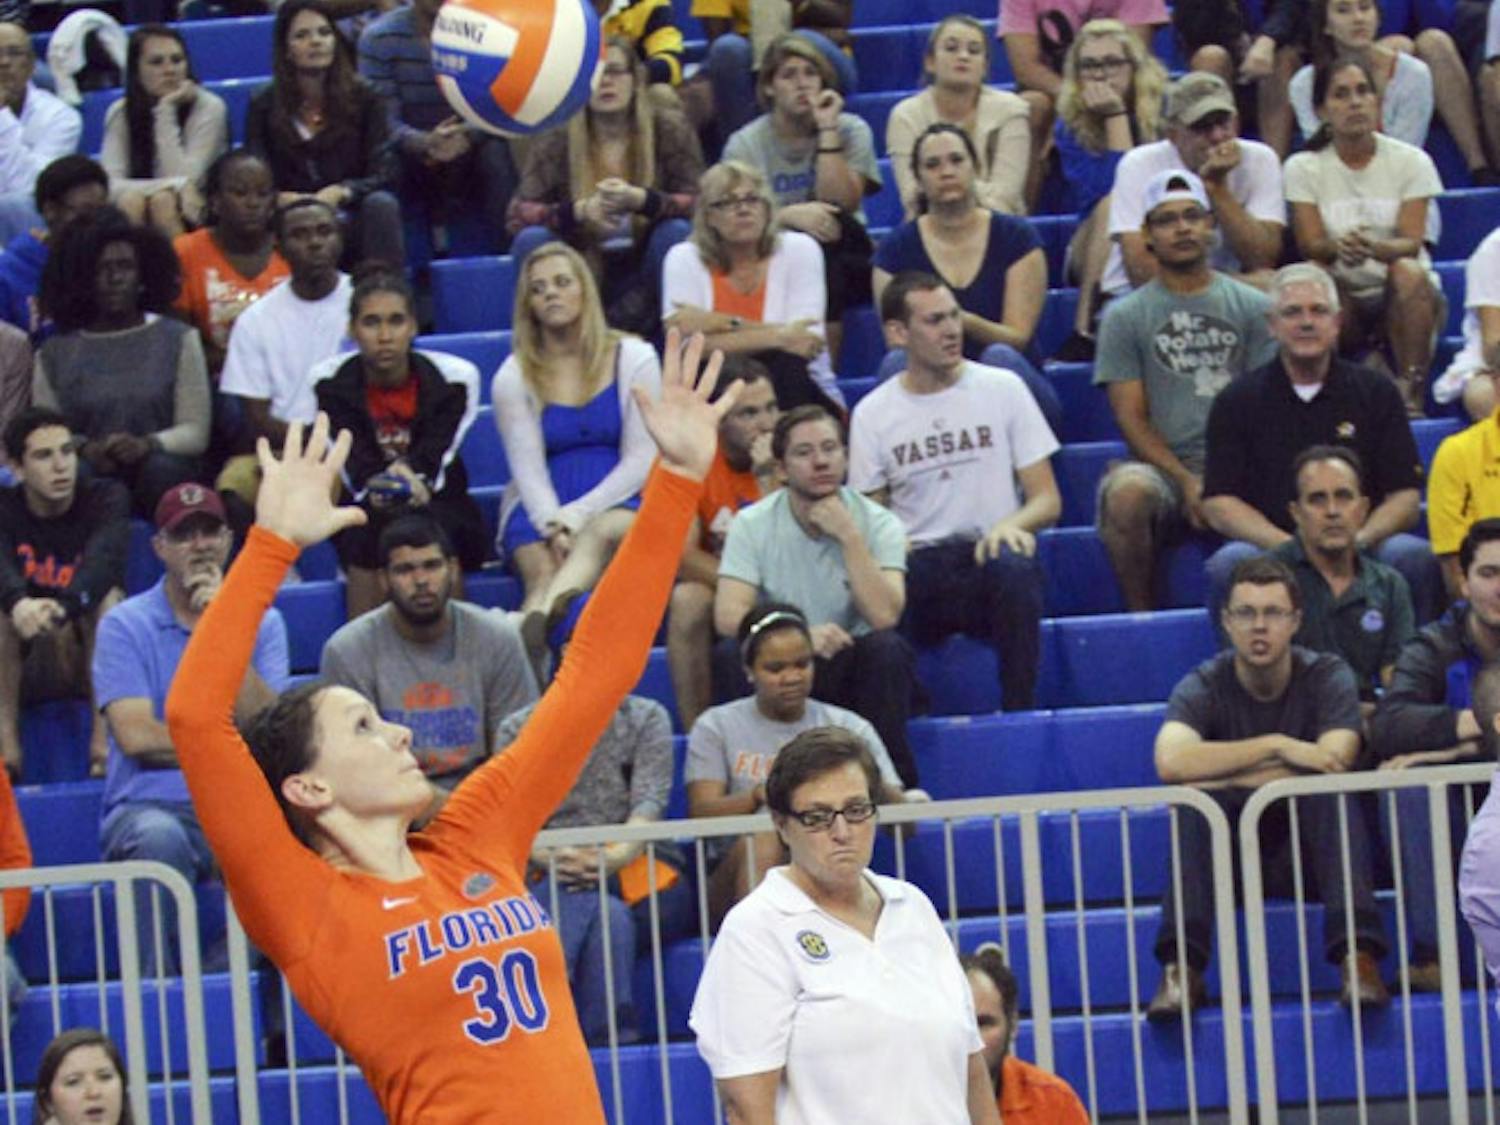 Holly Pole serves during Florida's 3-0 win against Missouri on Oct. 24 in the O'Connell Center